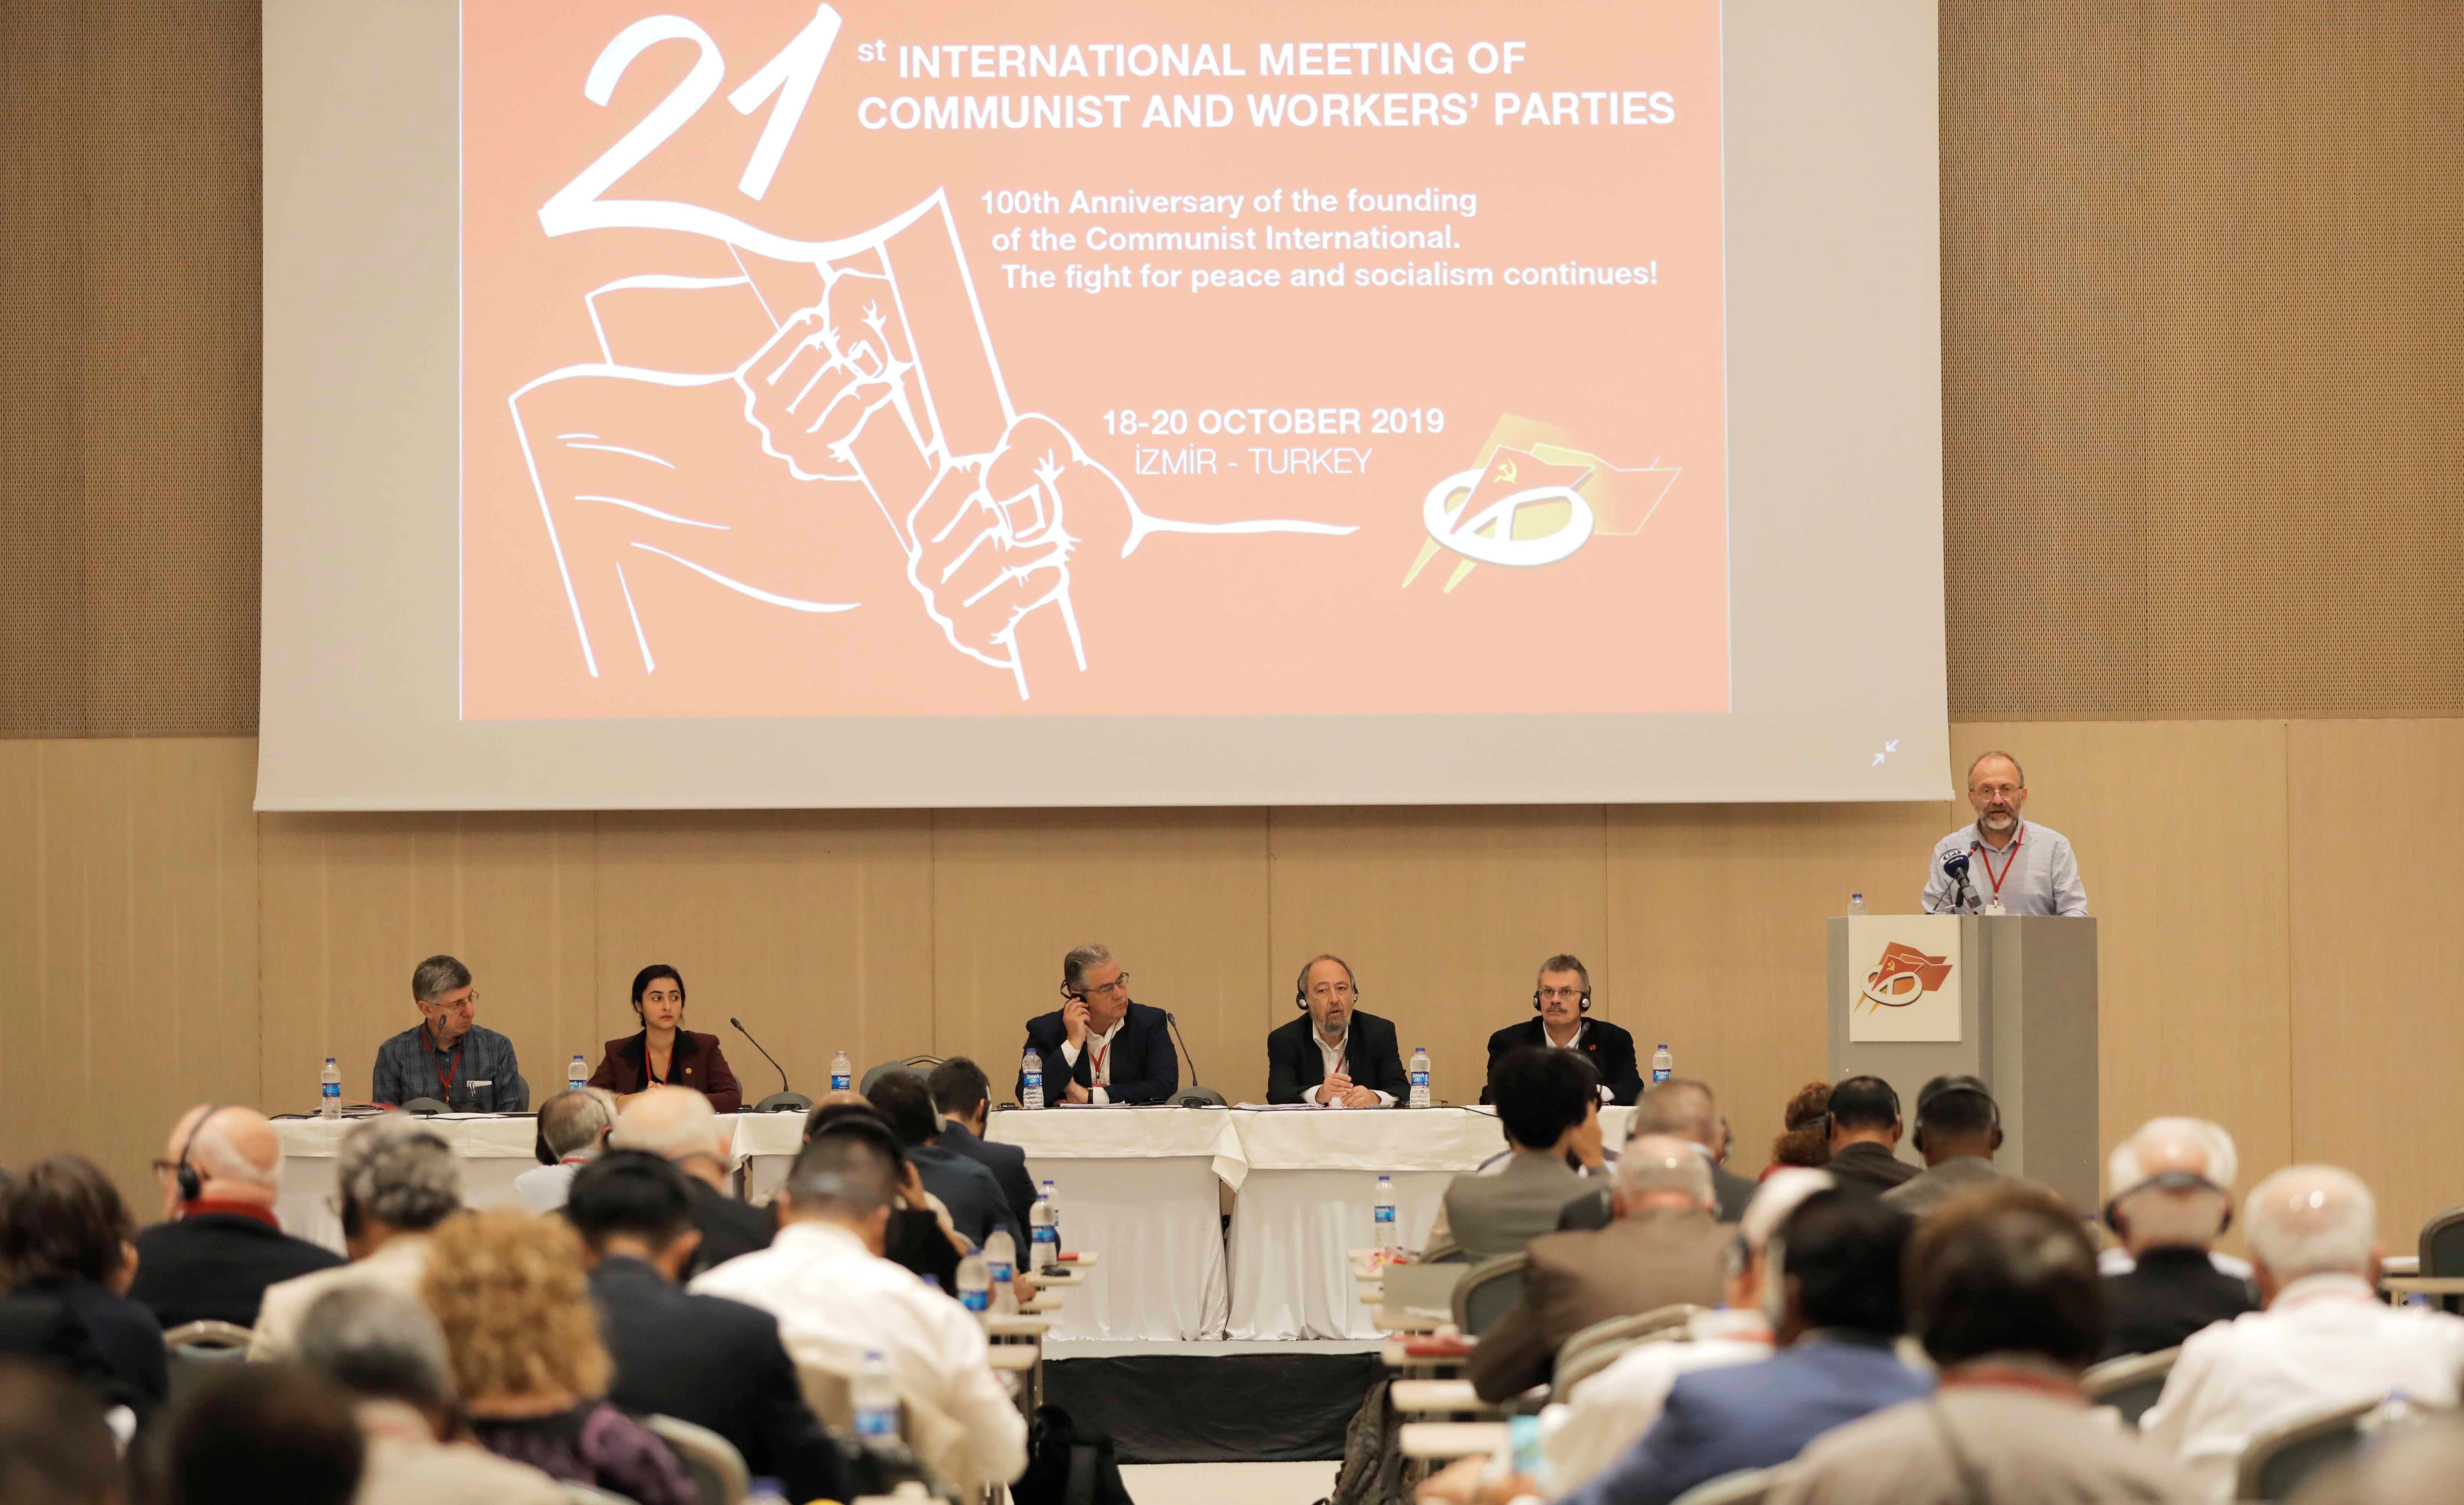 Communist Party of Turkey General Secretary, Kemal Okuyan, address delegates at the opening session of the 21st International Meeting of Communist and Workers' Parties held in Izmir, Turkey,  Friday, October 18, 2019..